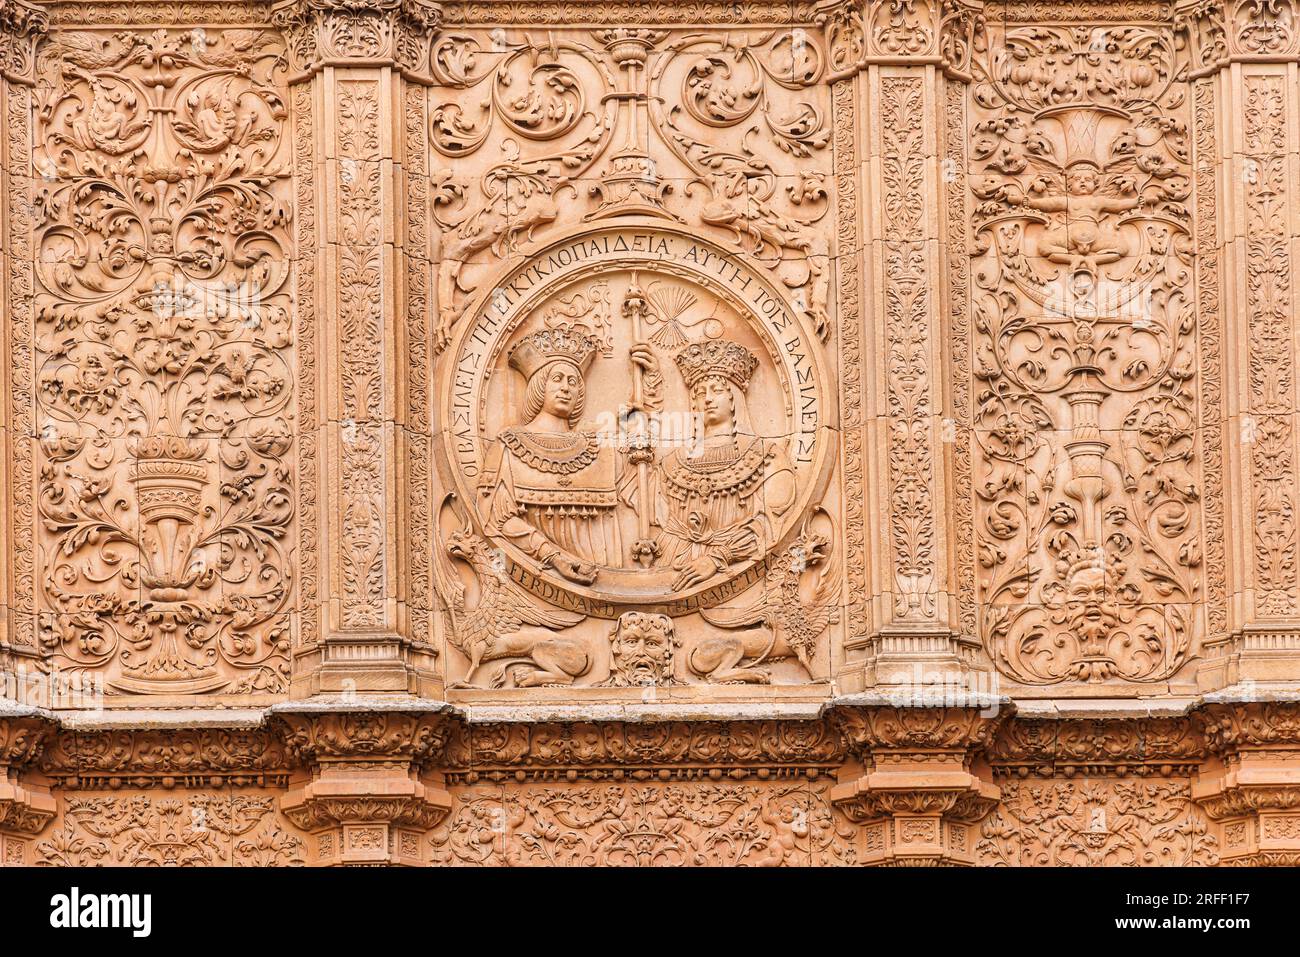 Spain, Castile and Leon, Salamanca, Old city of Salamanca listed as World Heritage by UNESCO, university door detail Stock Photo